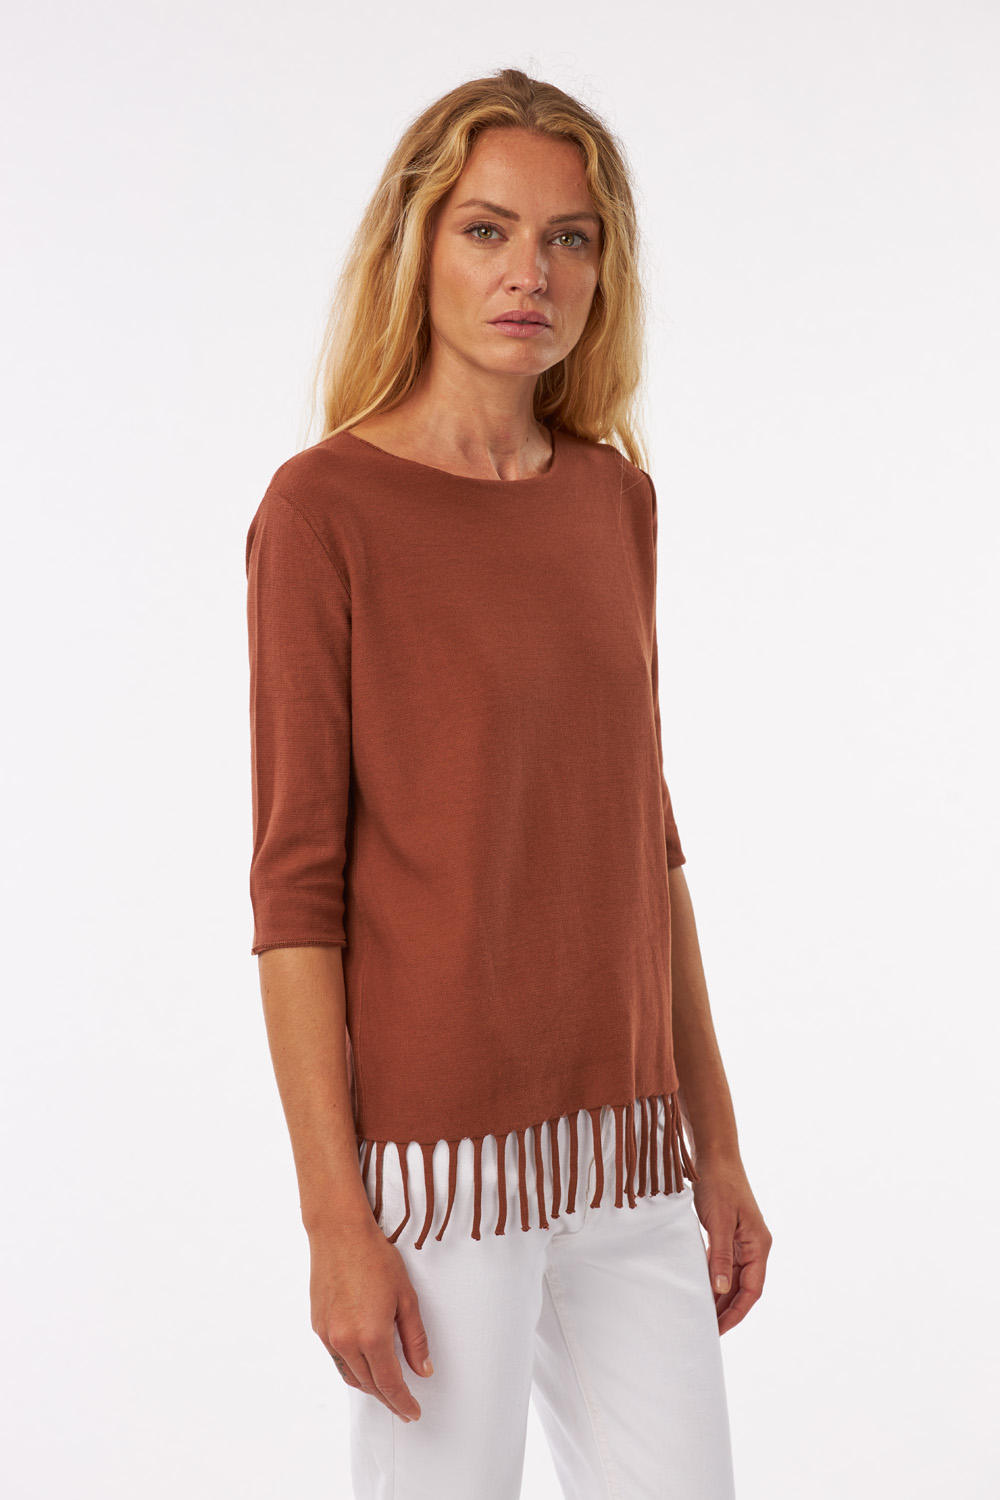 crew neck sweater in 100% Cotton with fringes at bottom